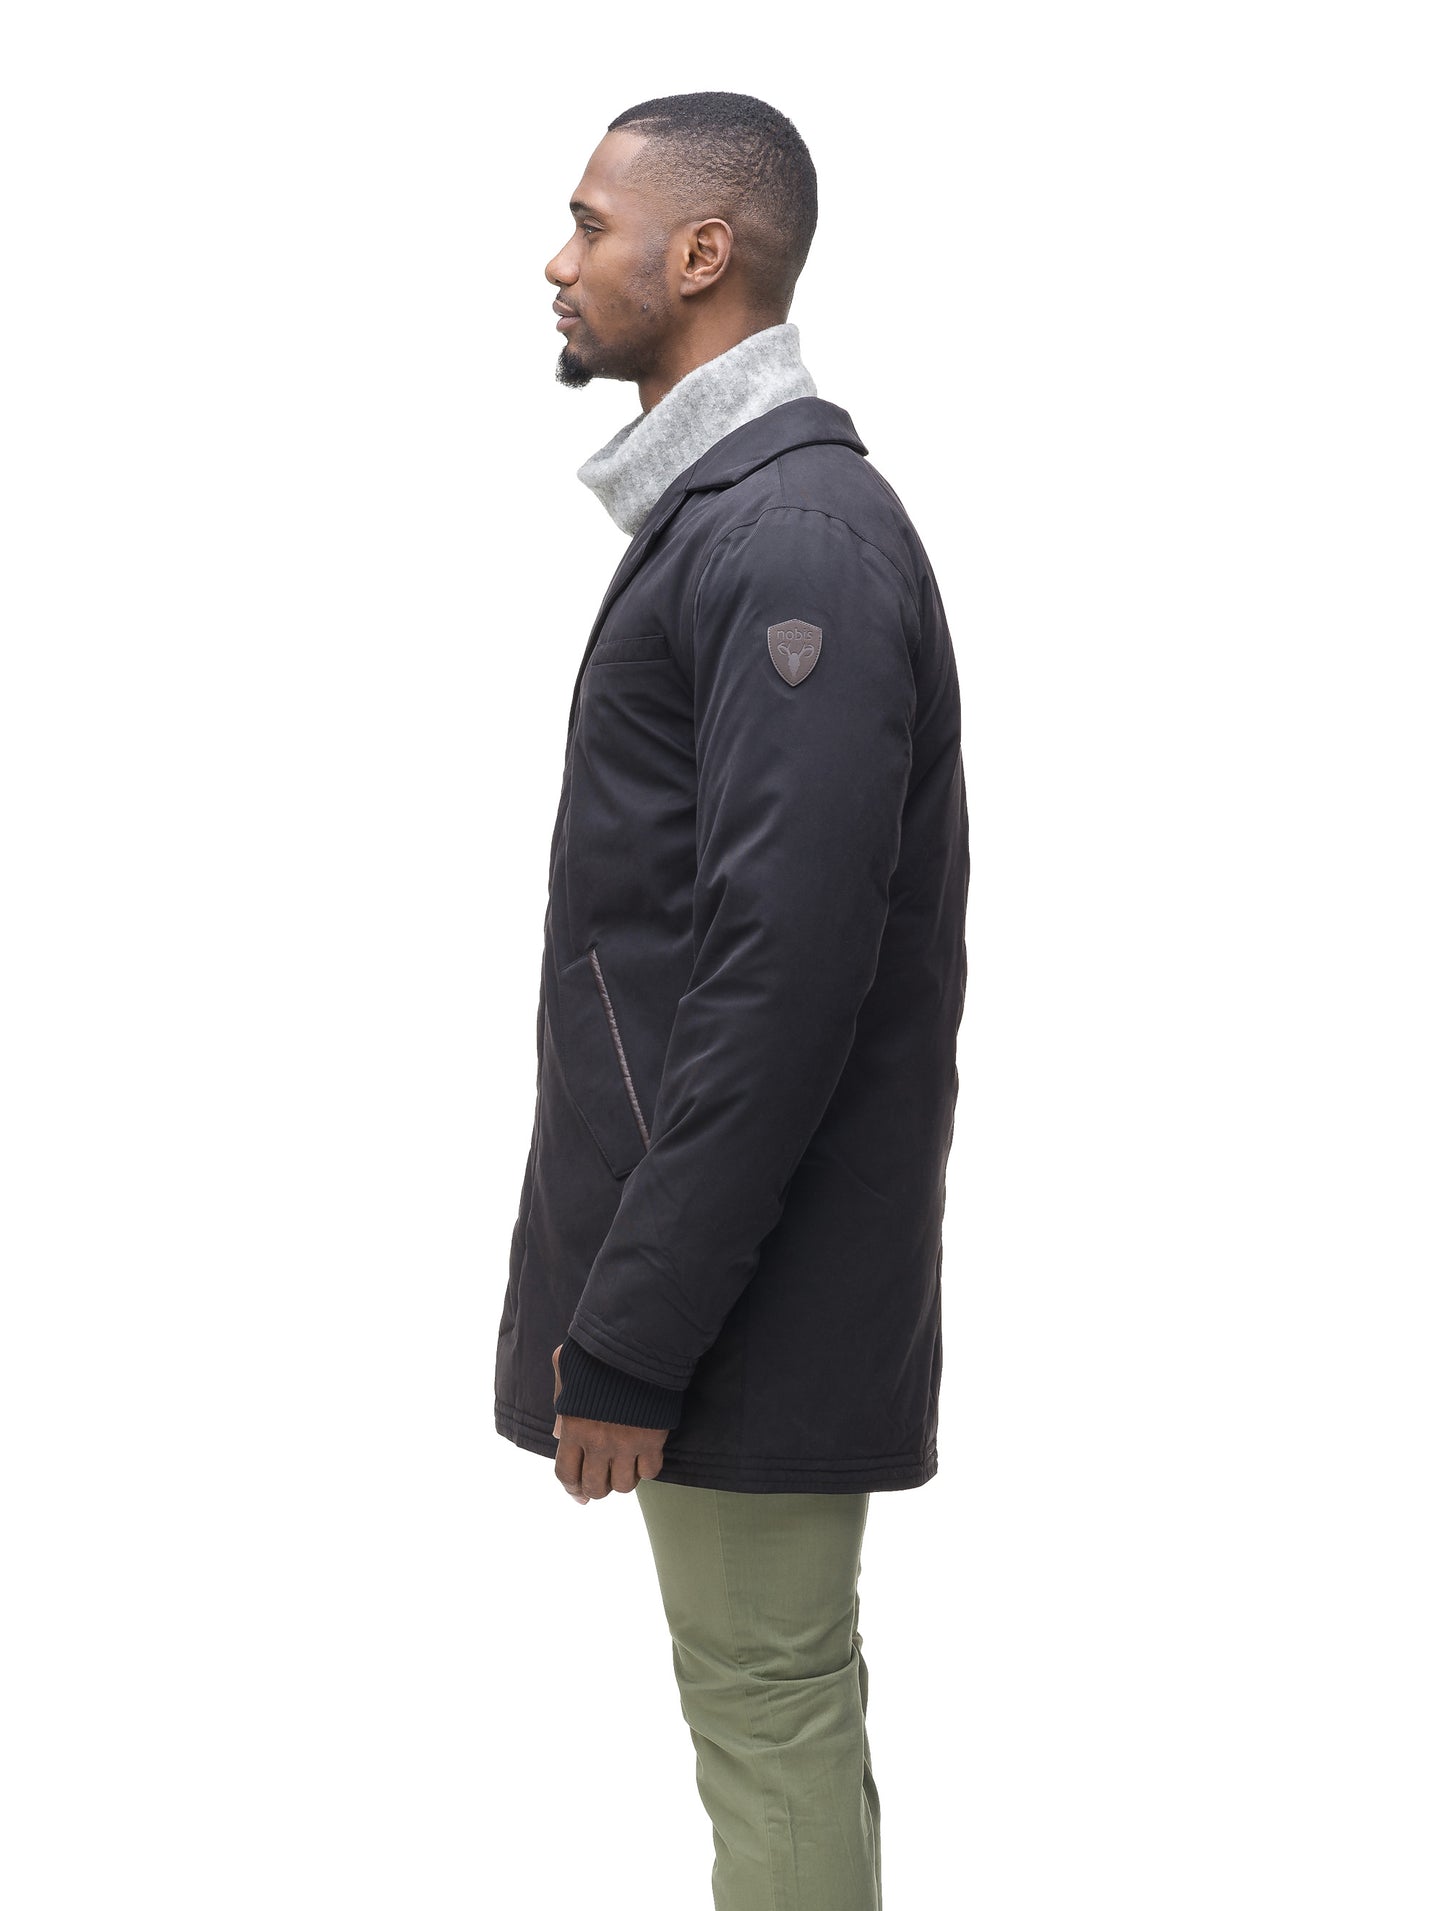 Men's classic overcoat that's lightly down filled, windproof and waterproof in Black